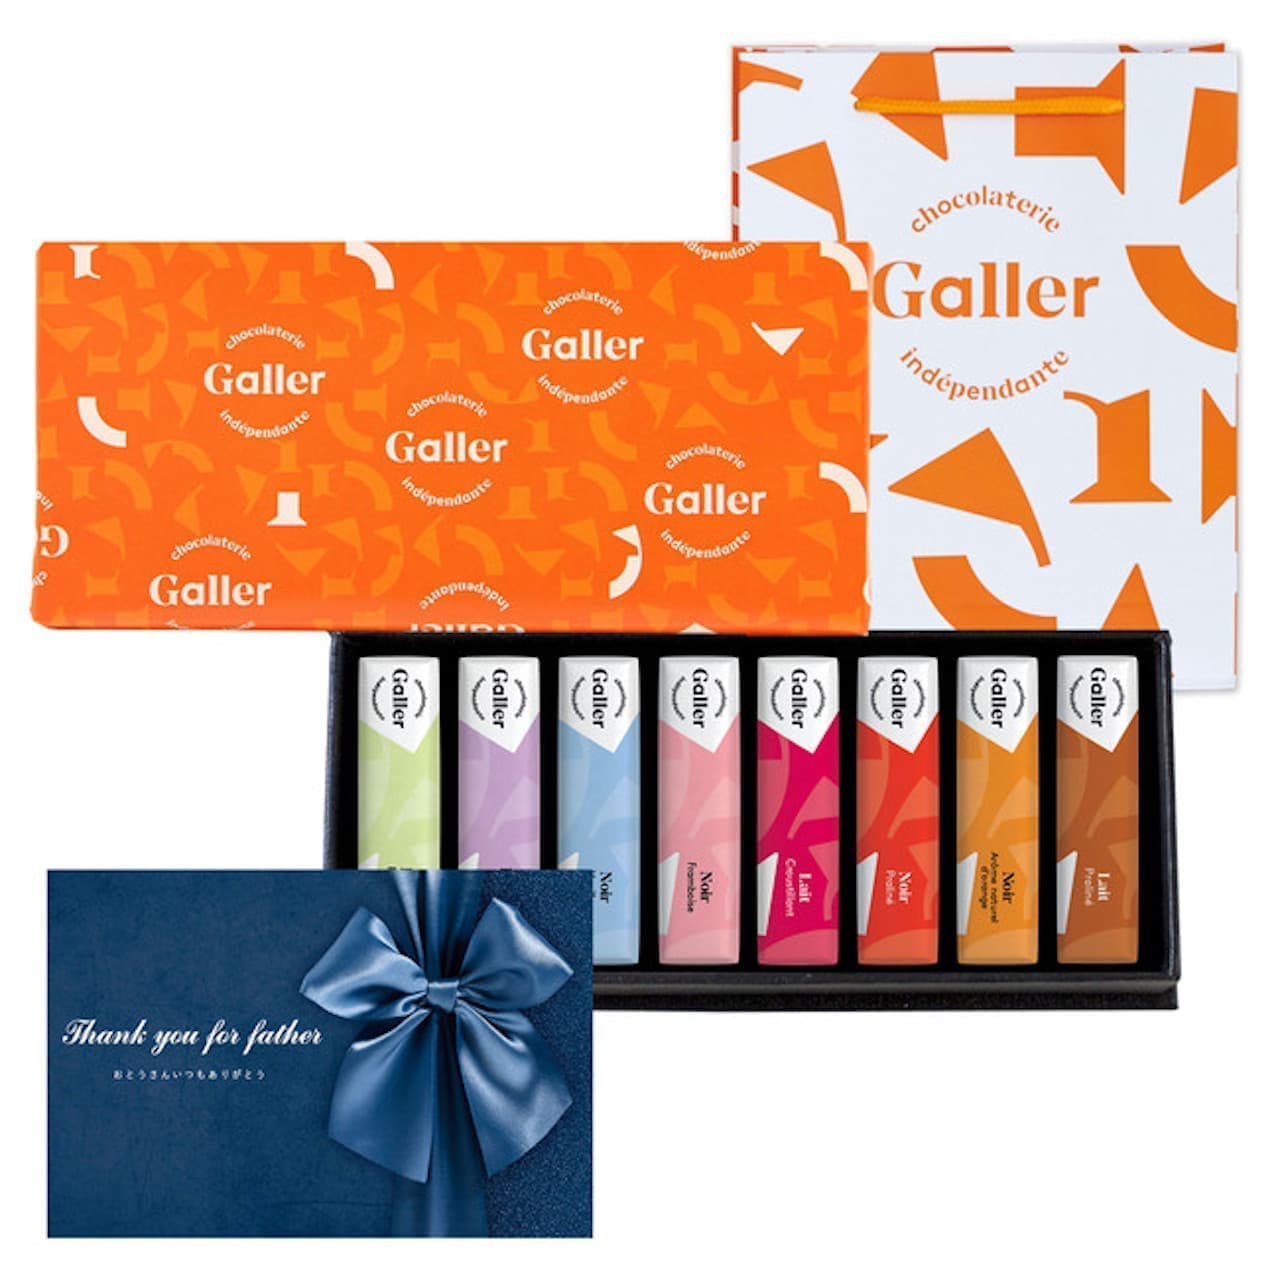 Galley "Minibar 8 pieces (wrapping + message card + paper carrying bag)"